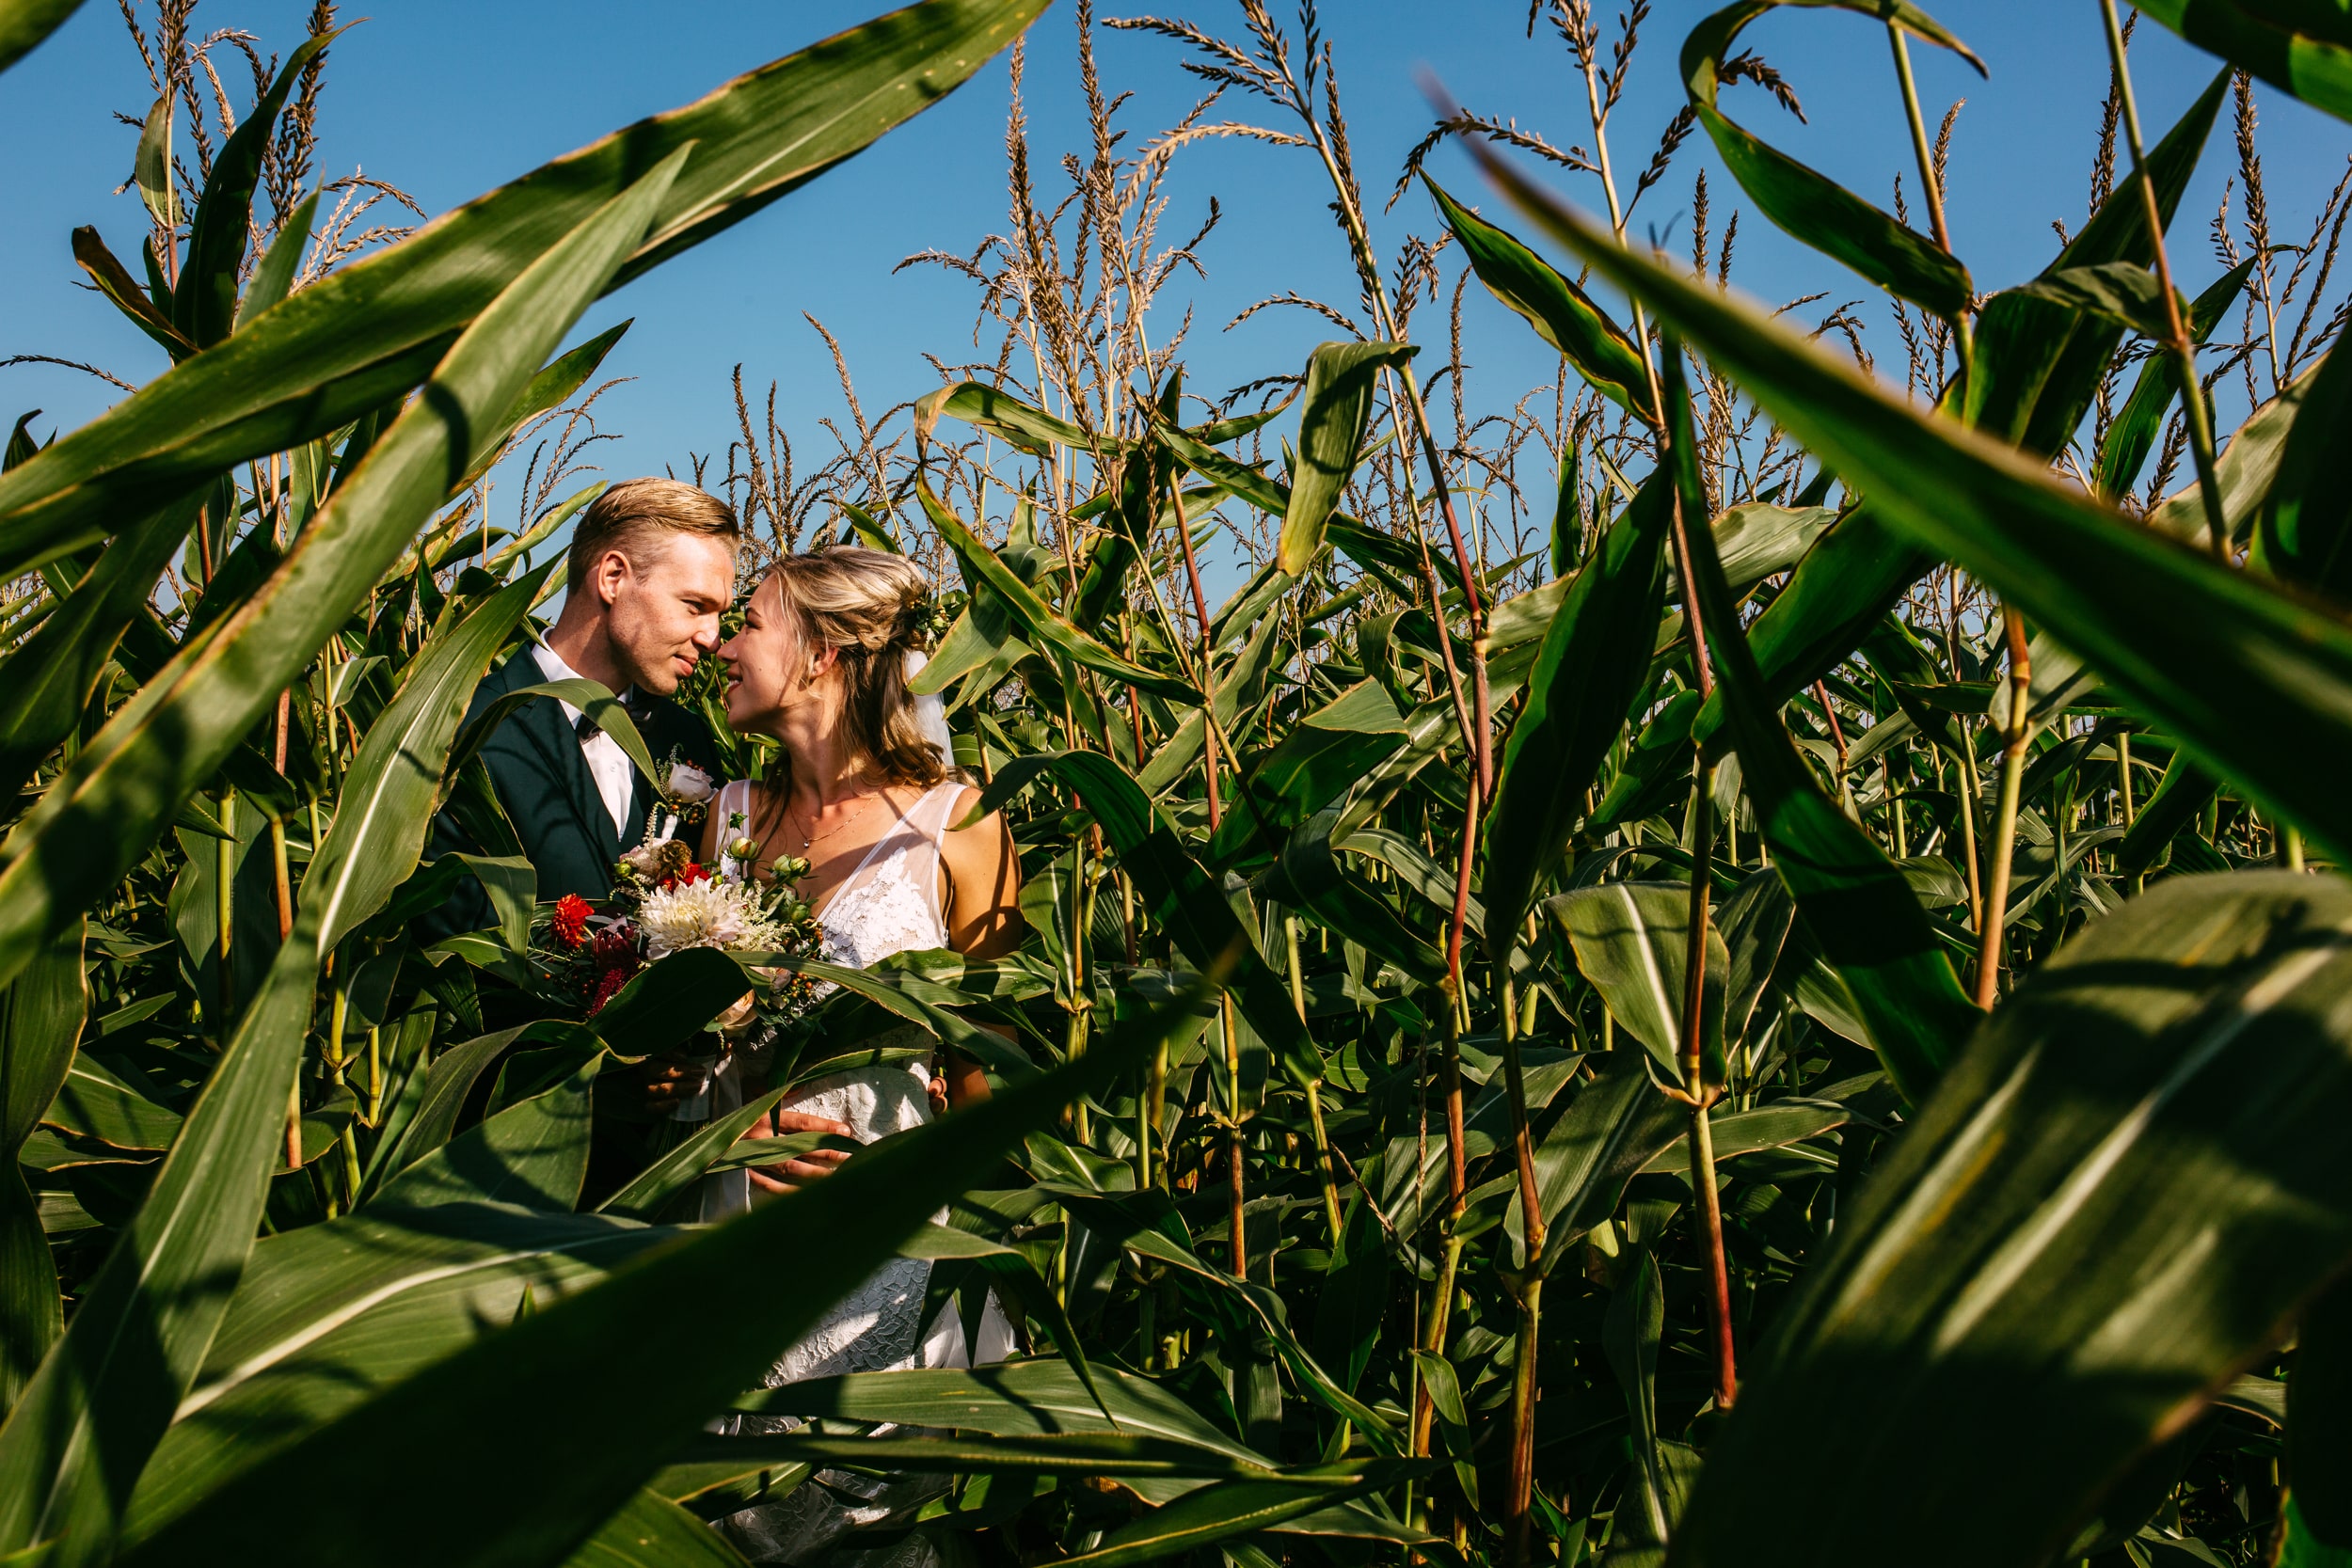 A bride and groom in a cornfield celebrate their wedding with a wedding theme.